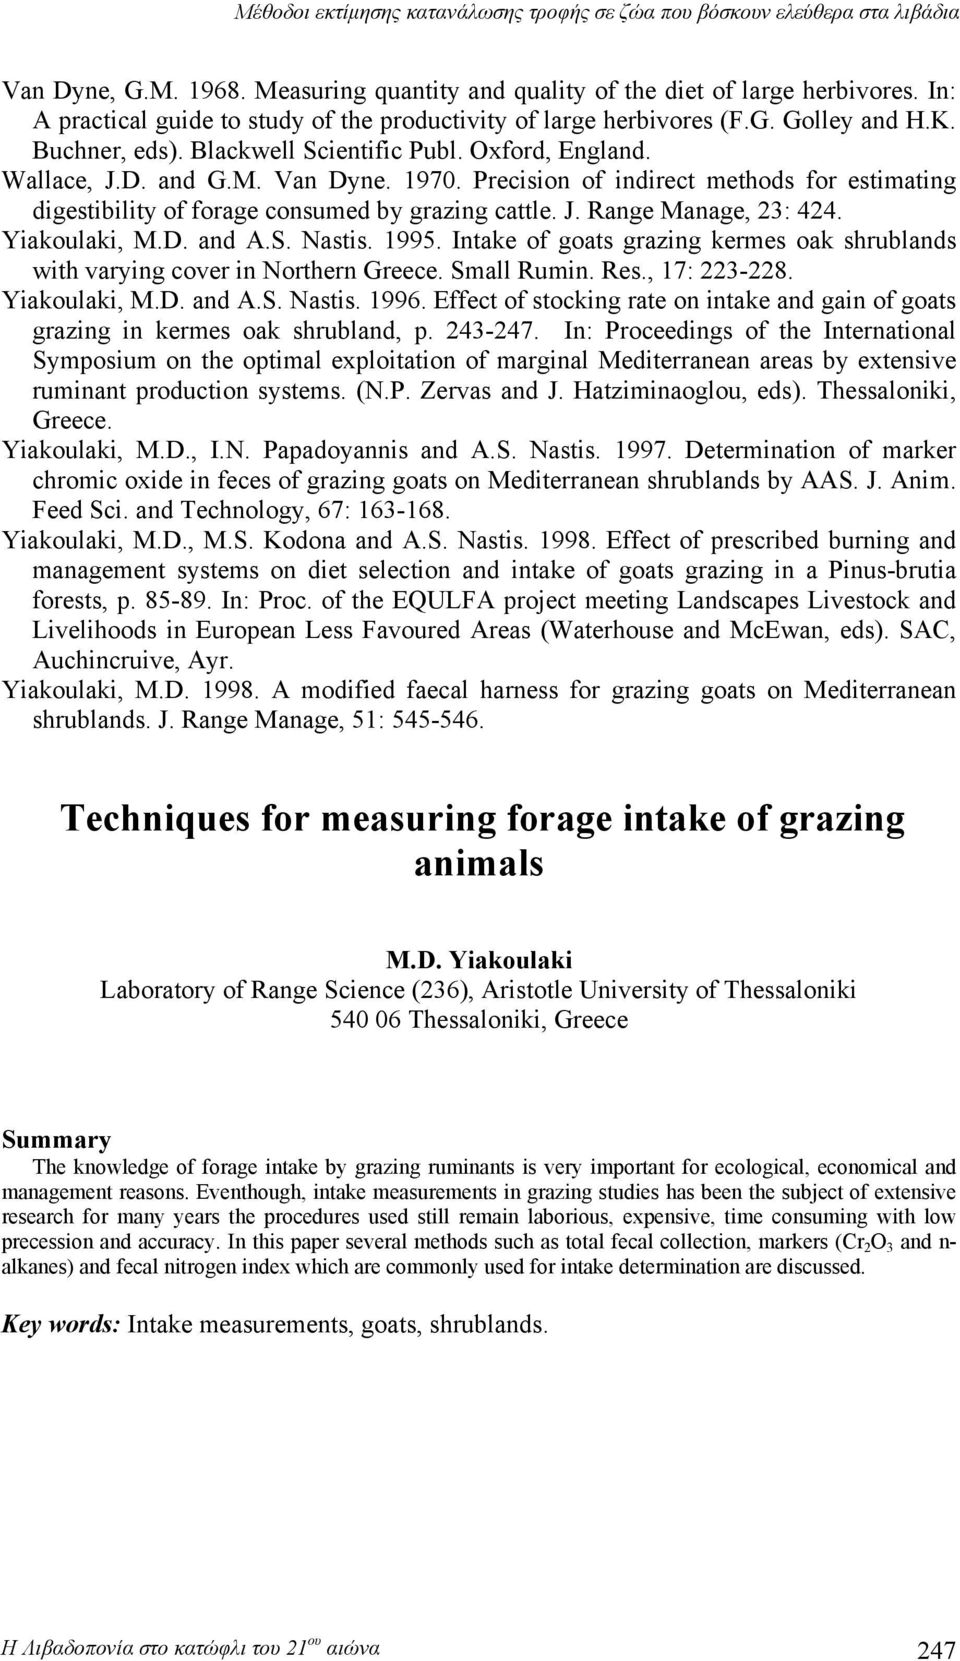 Yiakoulaki, M.D. and A.S. Nastis. 1995. Intake of goats grazing kermes oak shrublands with varying cover in Northern Greece. Small Rumin. Res., 17: 223-228. Yiakoulaki, M.D. and A.S. Nastis. 1996.